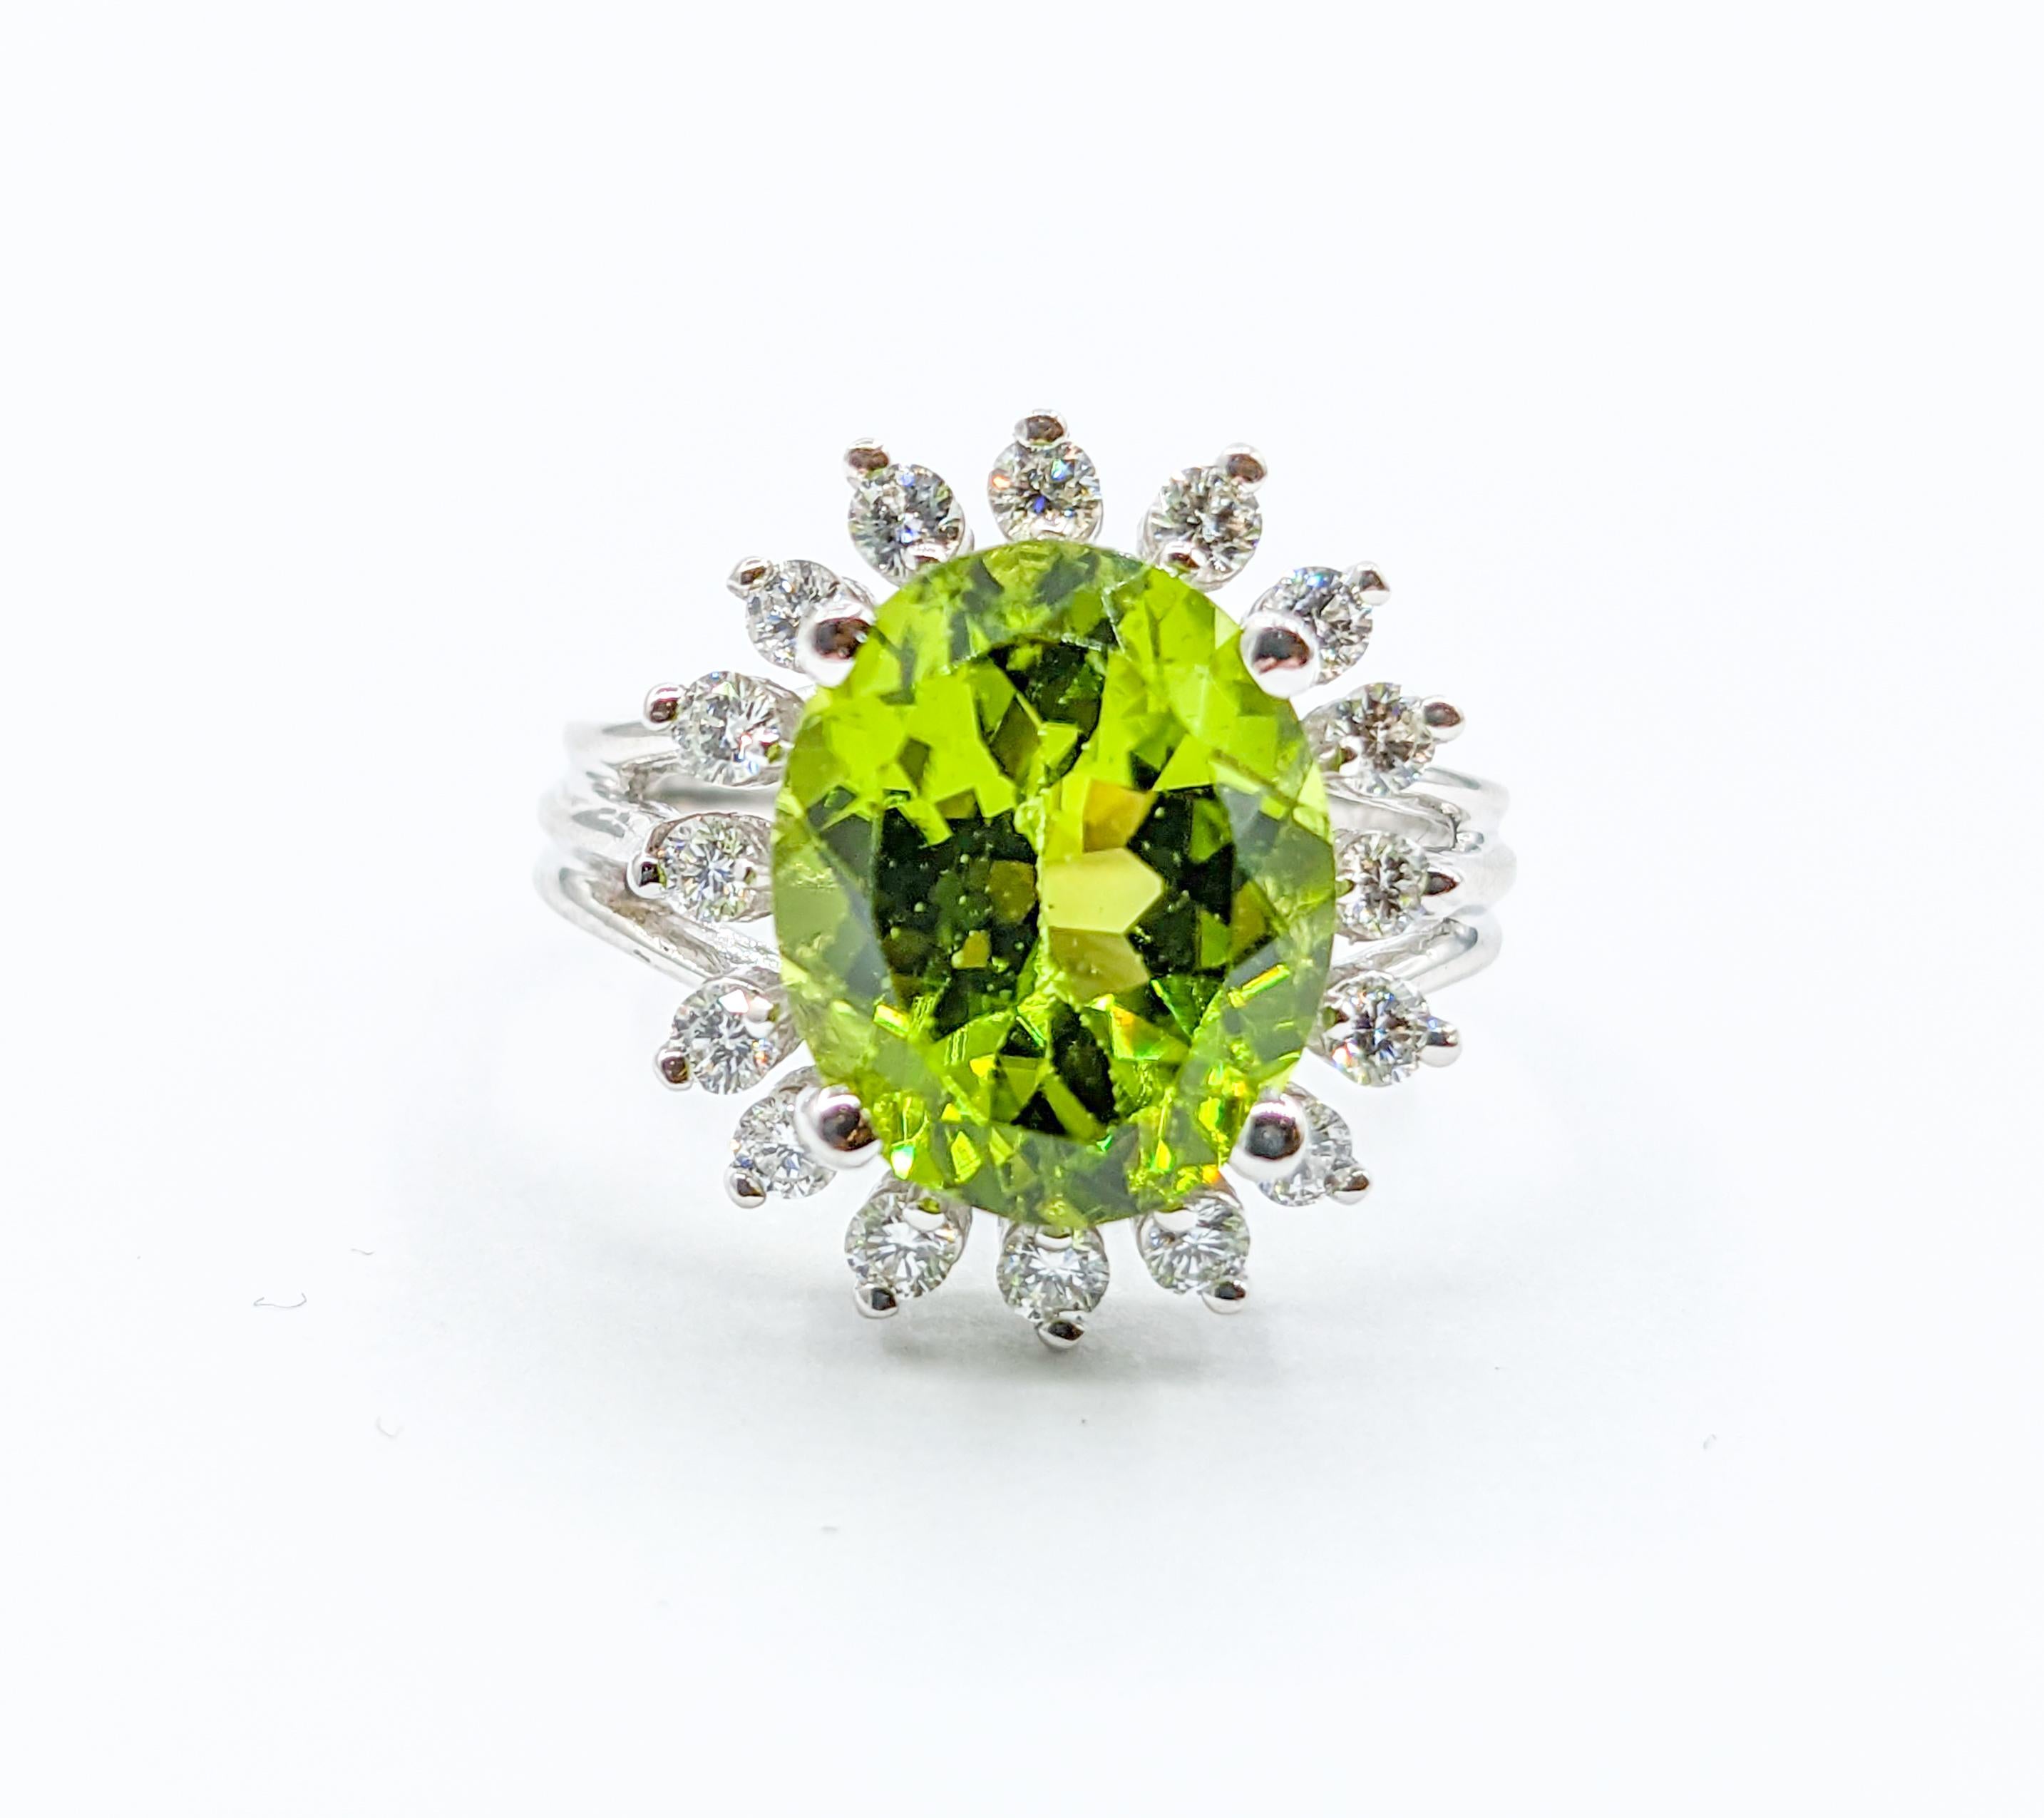 5ct Peridot & Diamond Halo Cocktail Ring For Sale 3